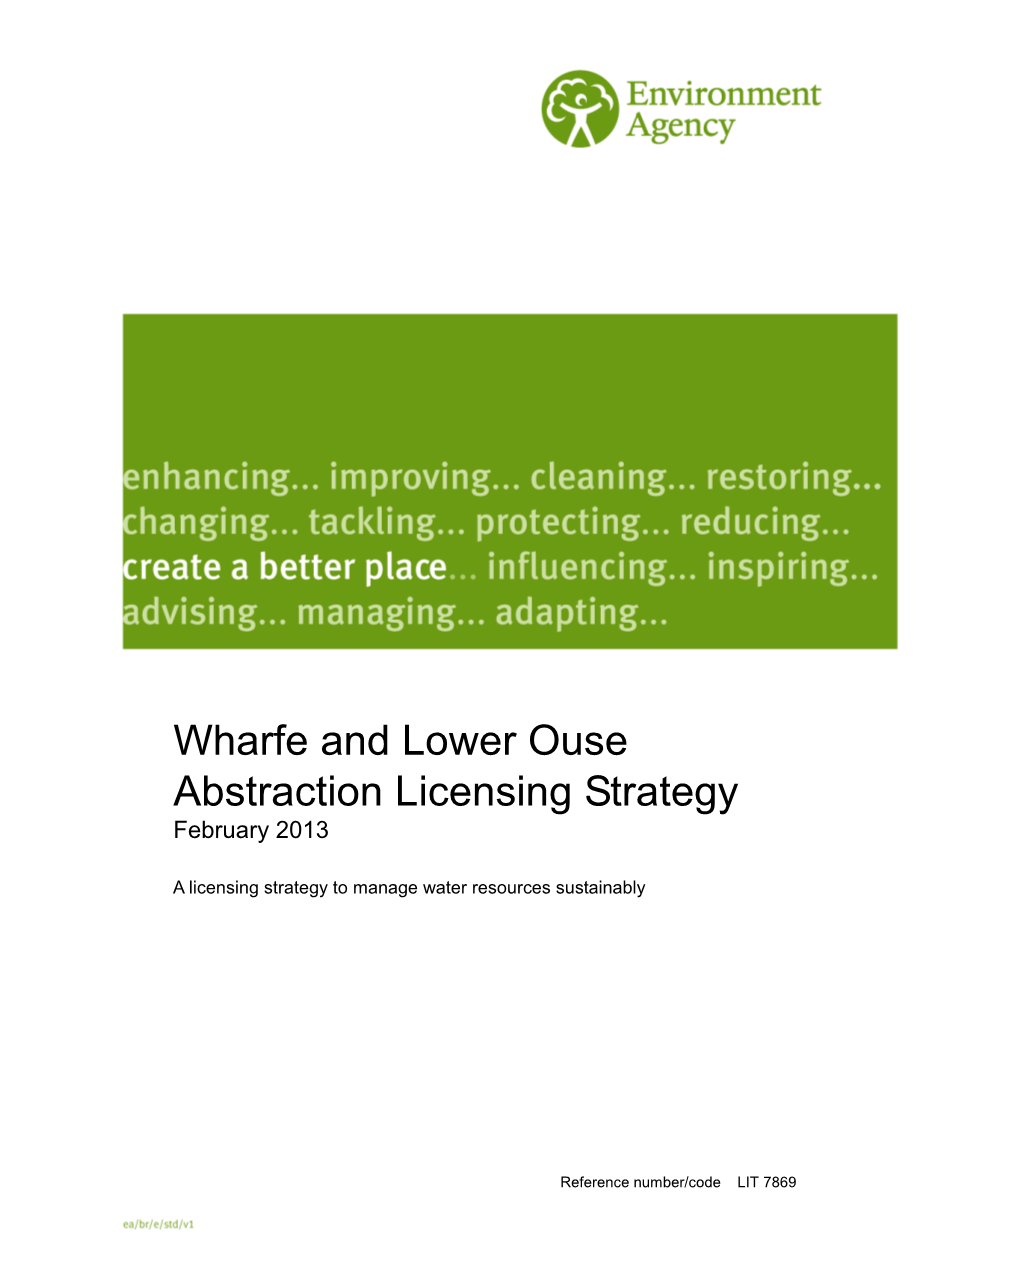 Wharfe and Lower Ouse Abstraction Licensing Strategy Feb 2013 1 Map 1